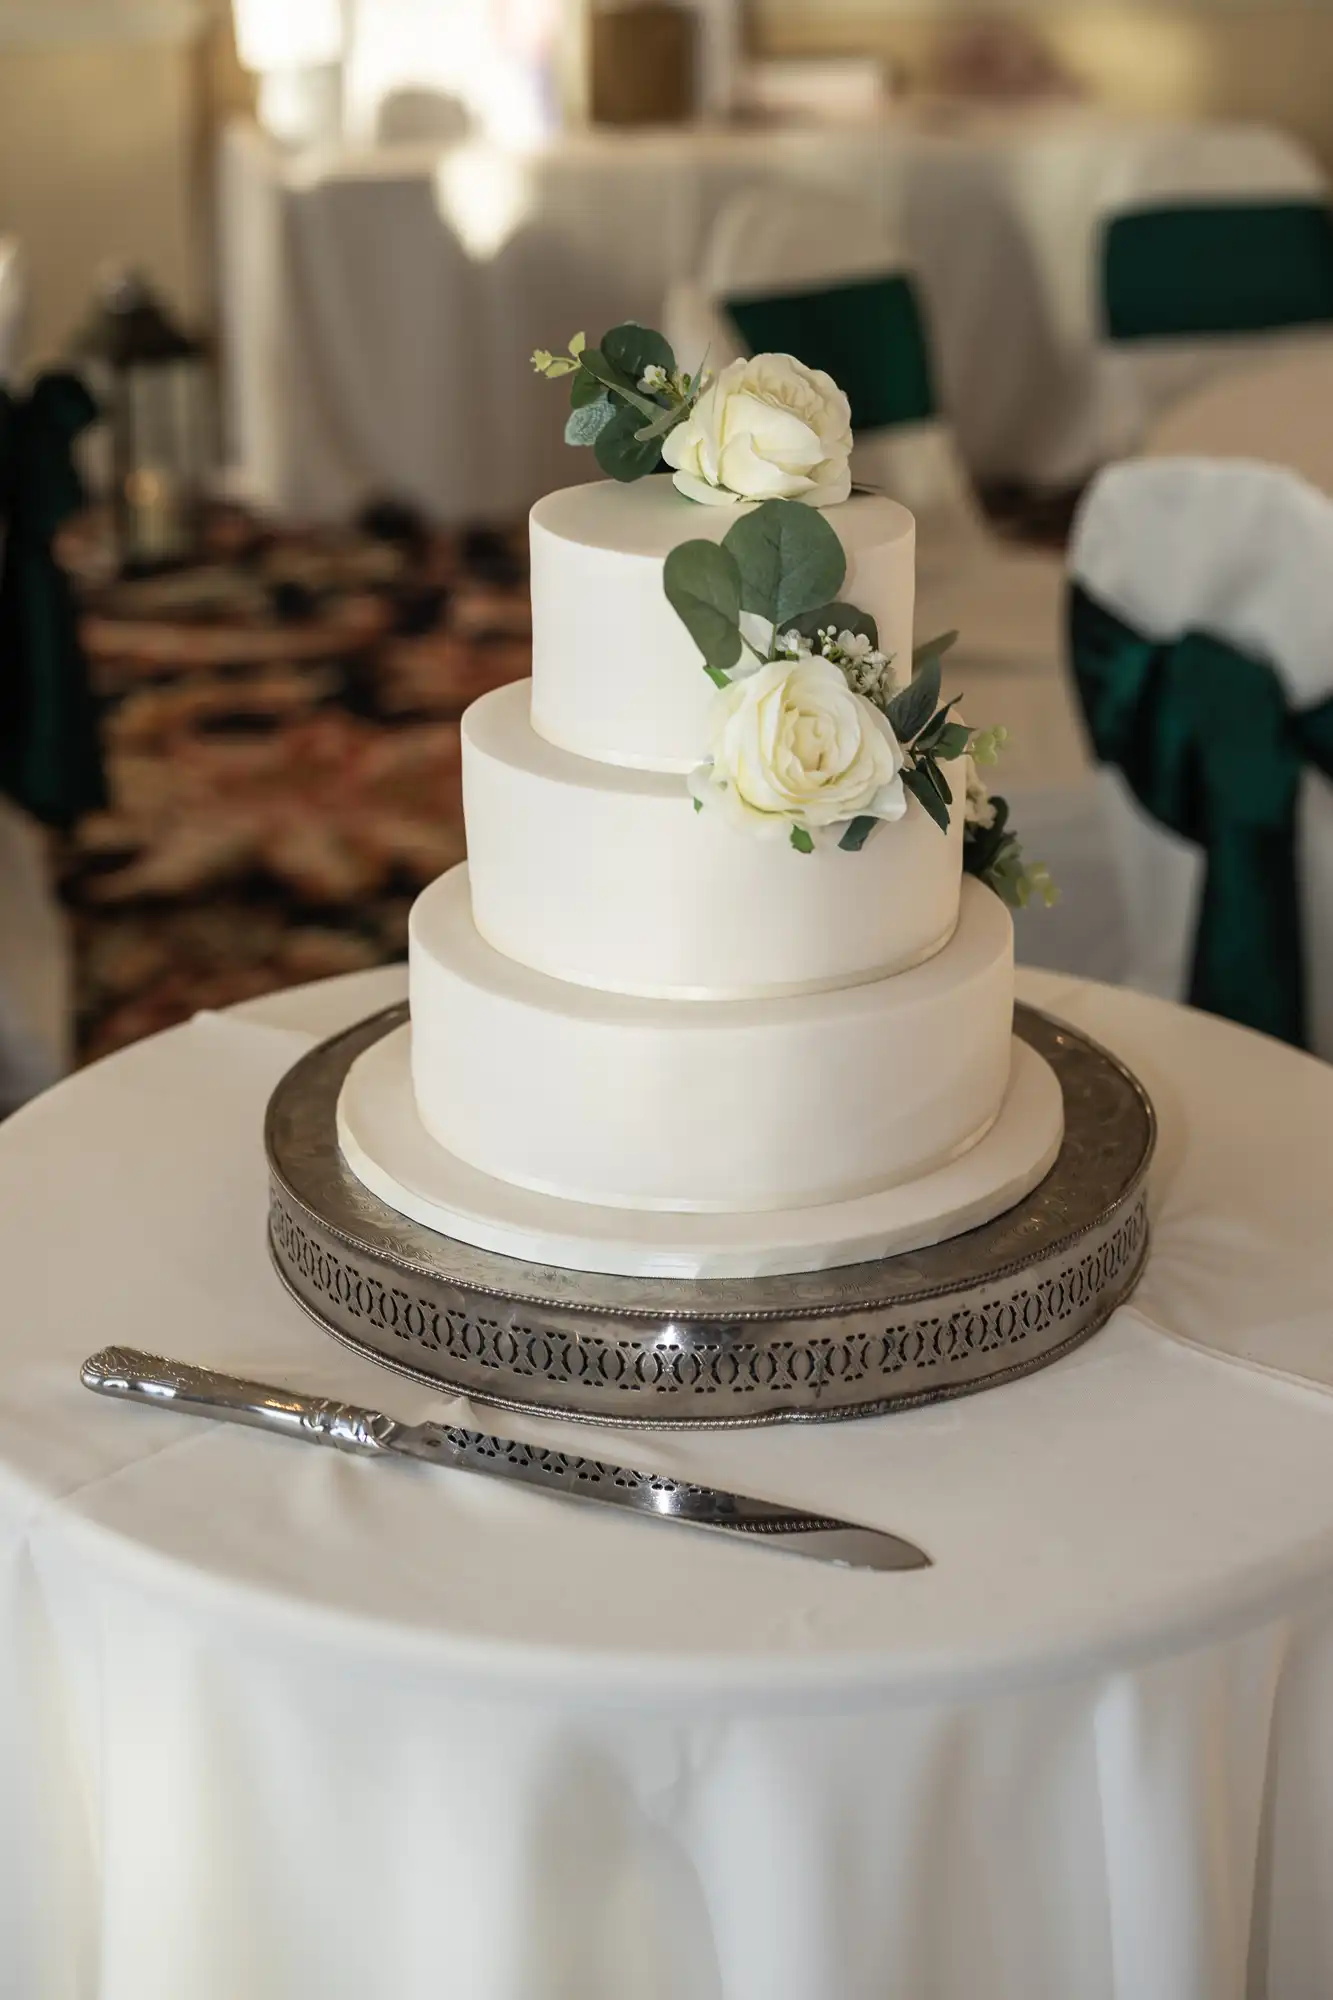 A three-tiered white wedding cake decorated with white roses on a silver stand, with a cake knife beside it, set in an elegantly decorated room.